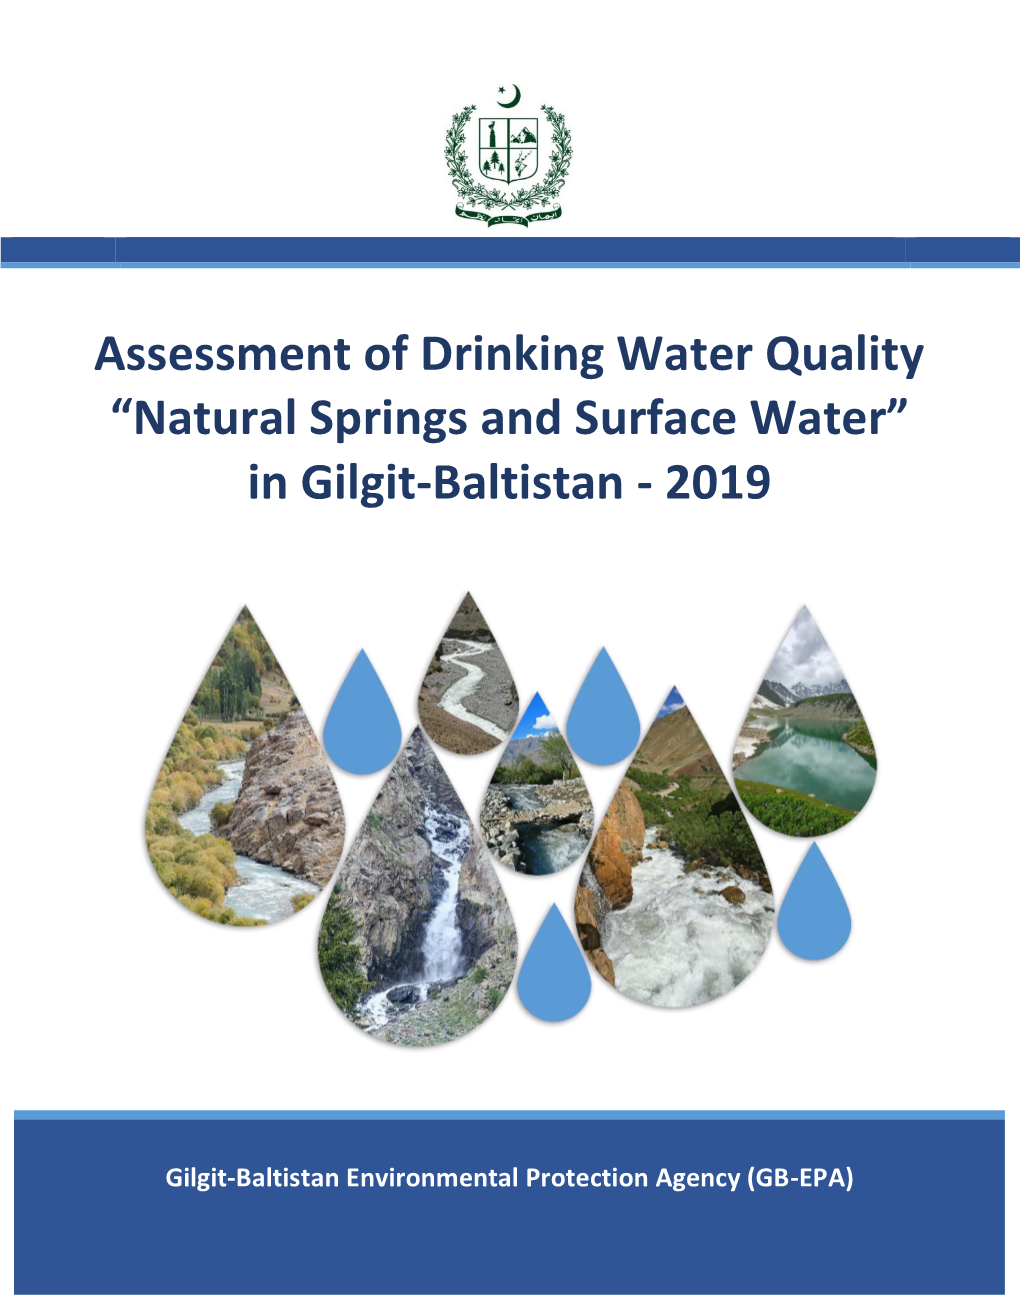 Assessment of Drinking Water Quality “Natural Springs and Surface Water”